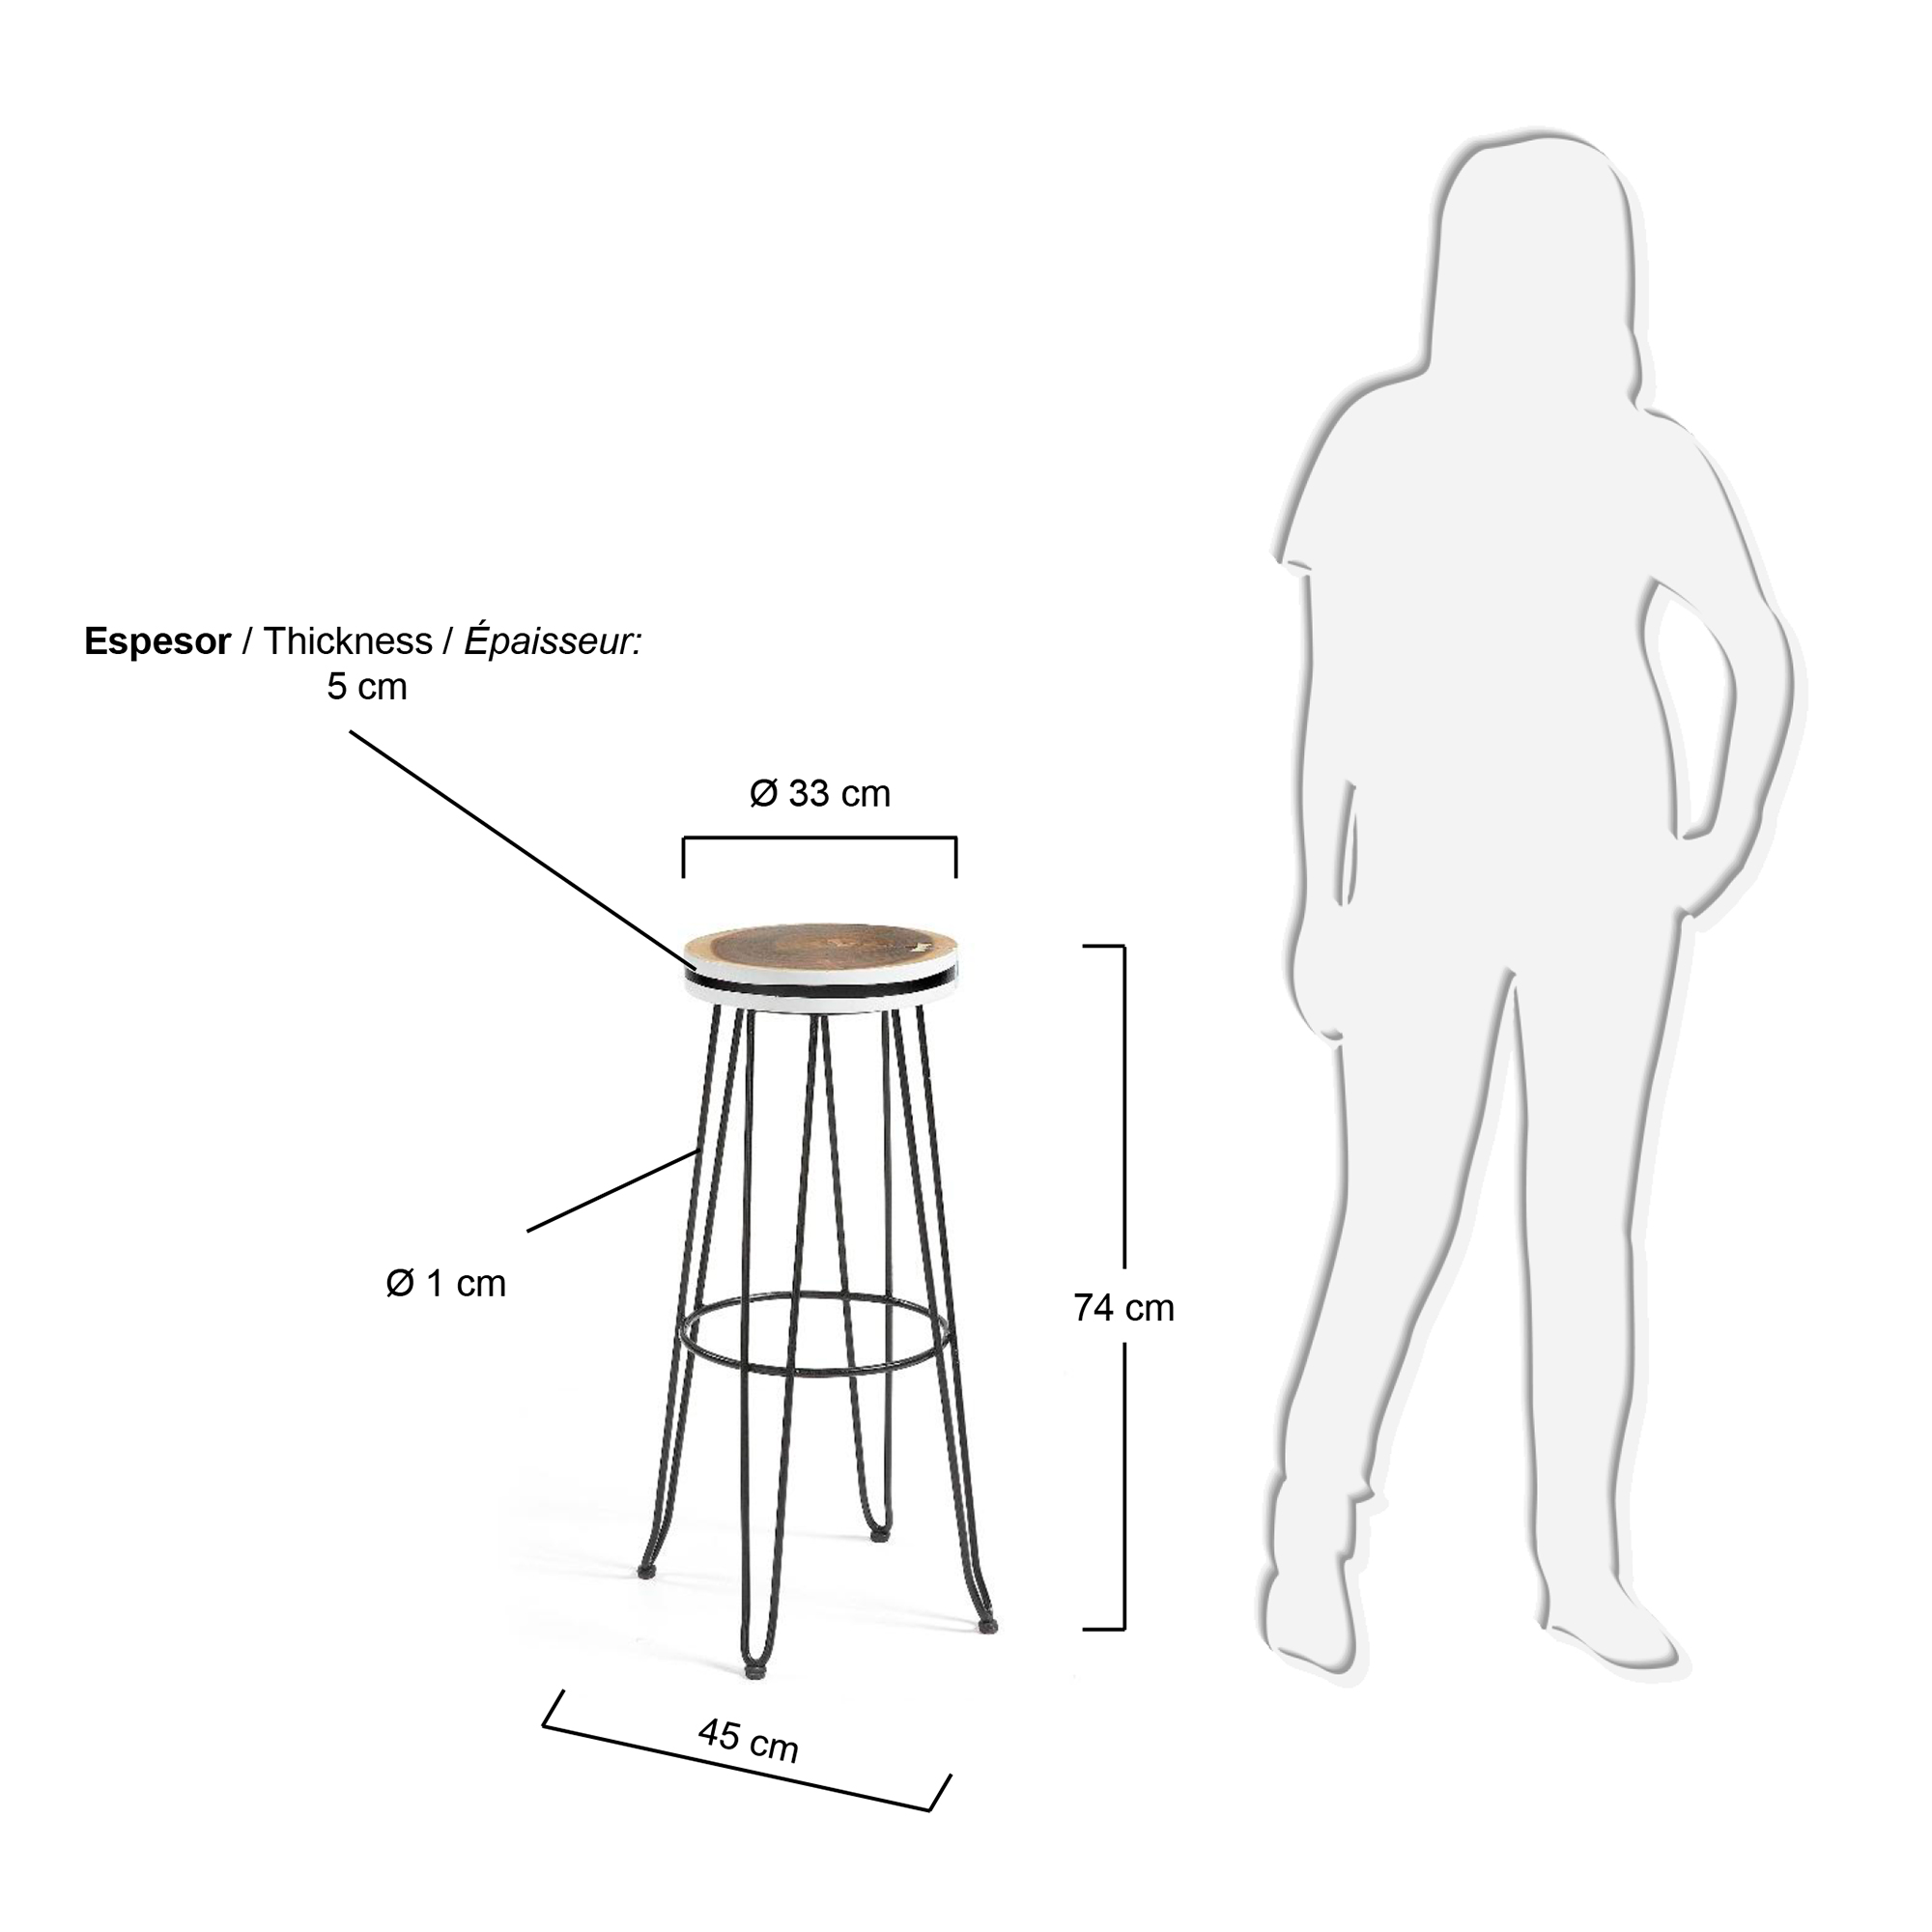 Faye solid mungur wood & steel stool with a copper effect finish, 74 cm height - sizes